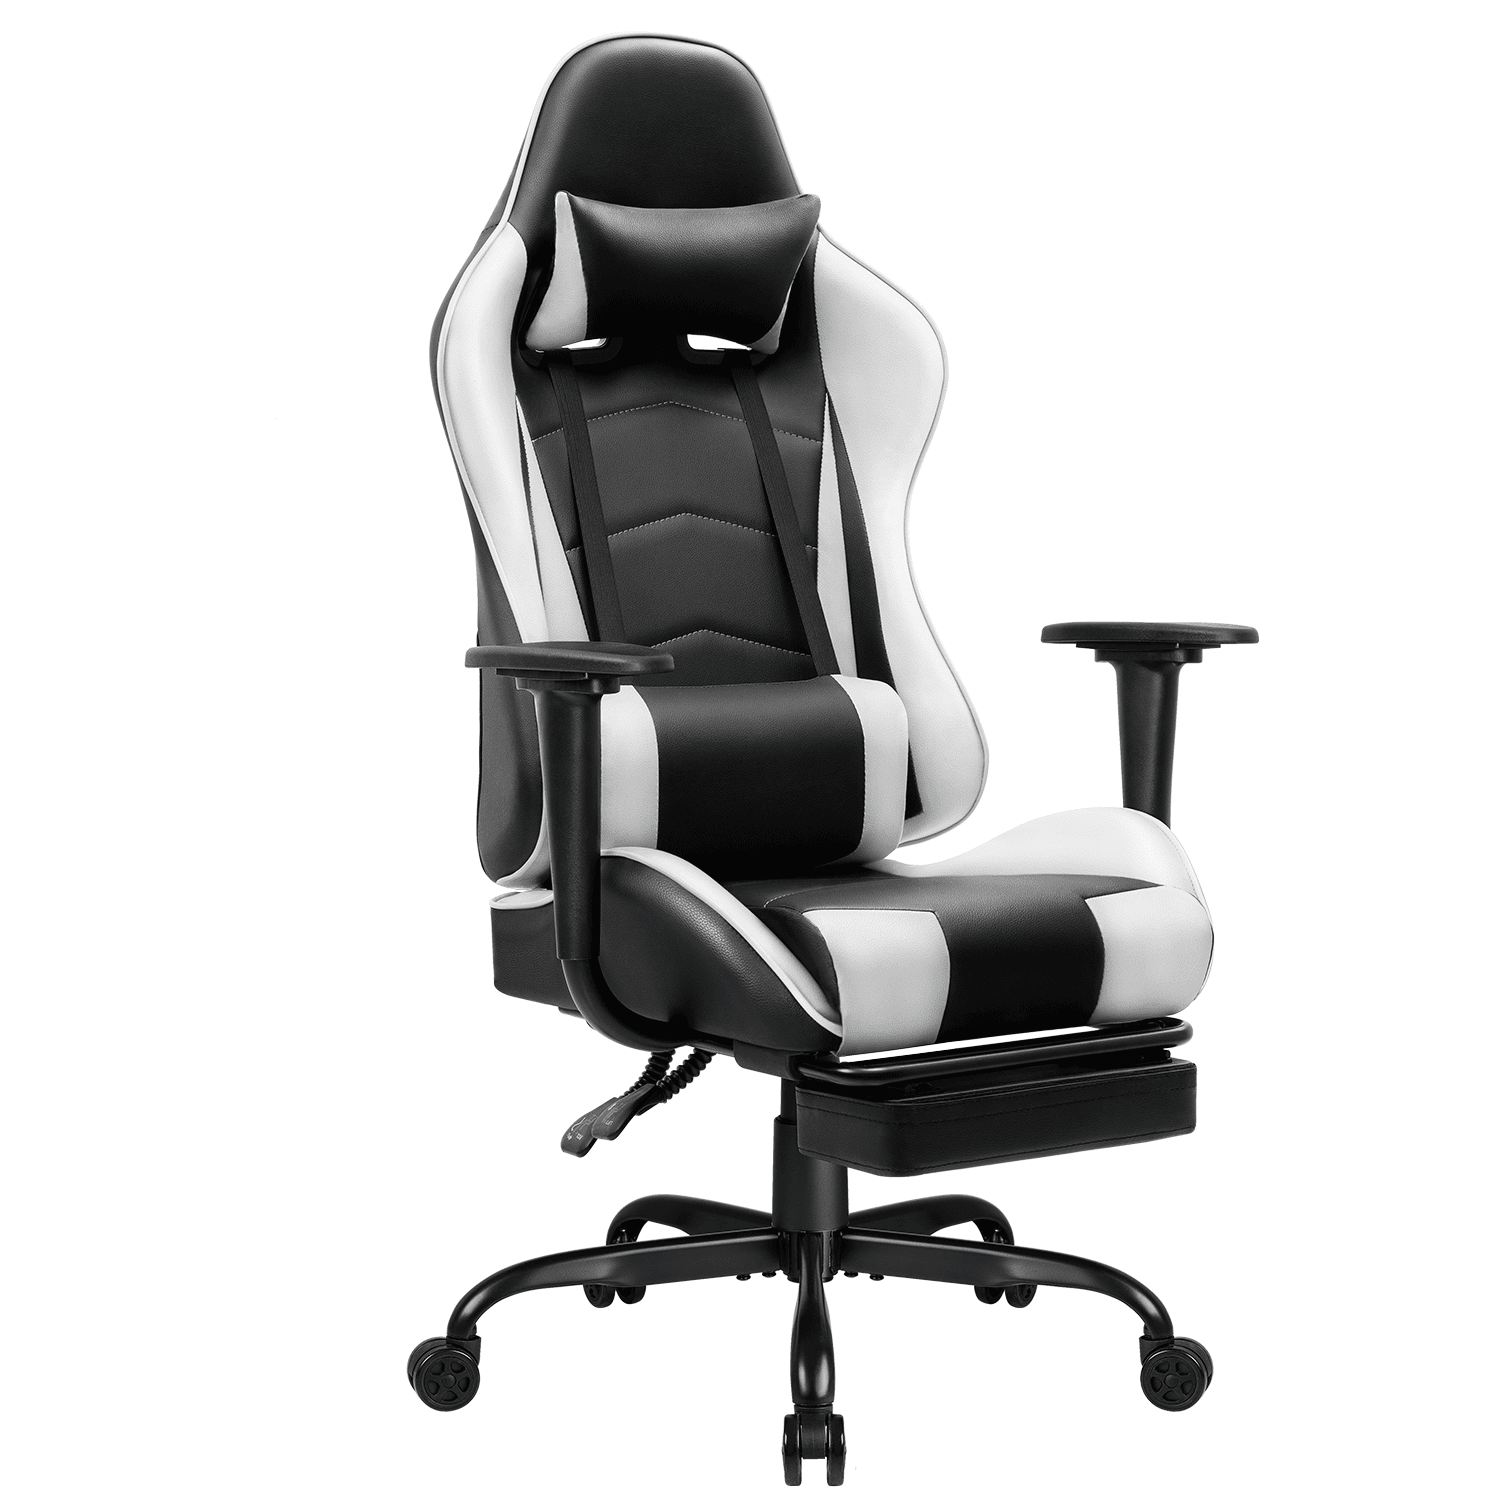 Executive Racing Style PU Gaming Chair High Back Recliner Office White and Black 